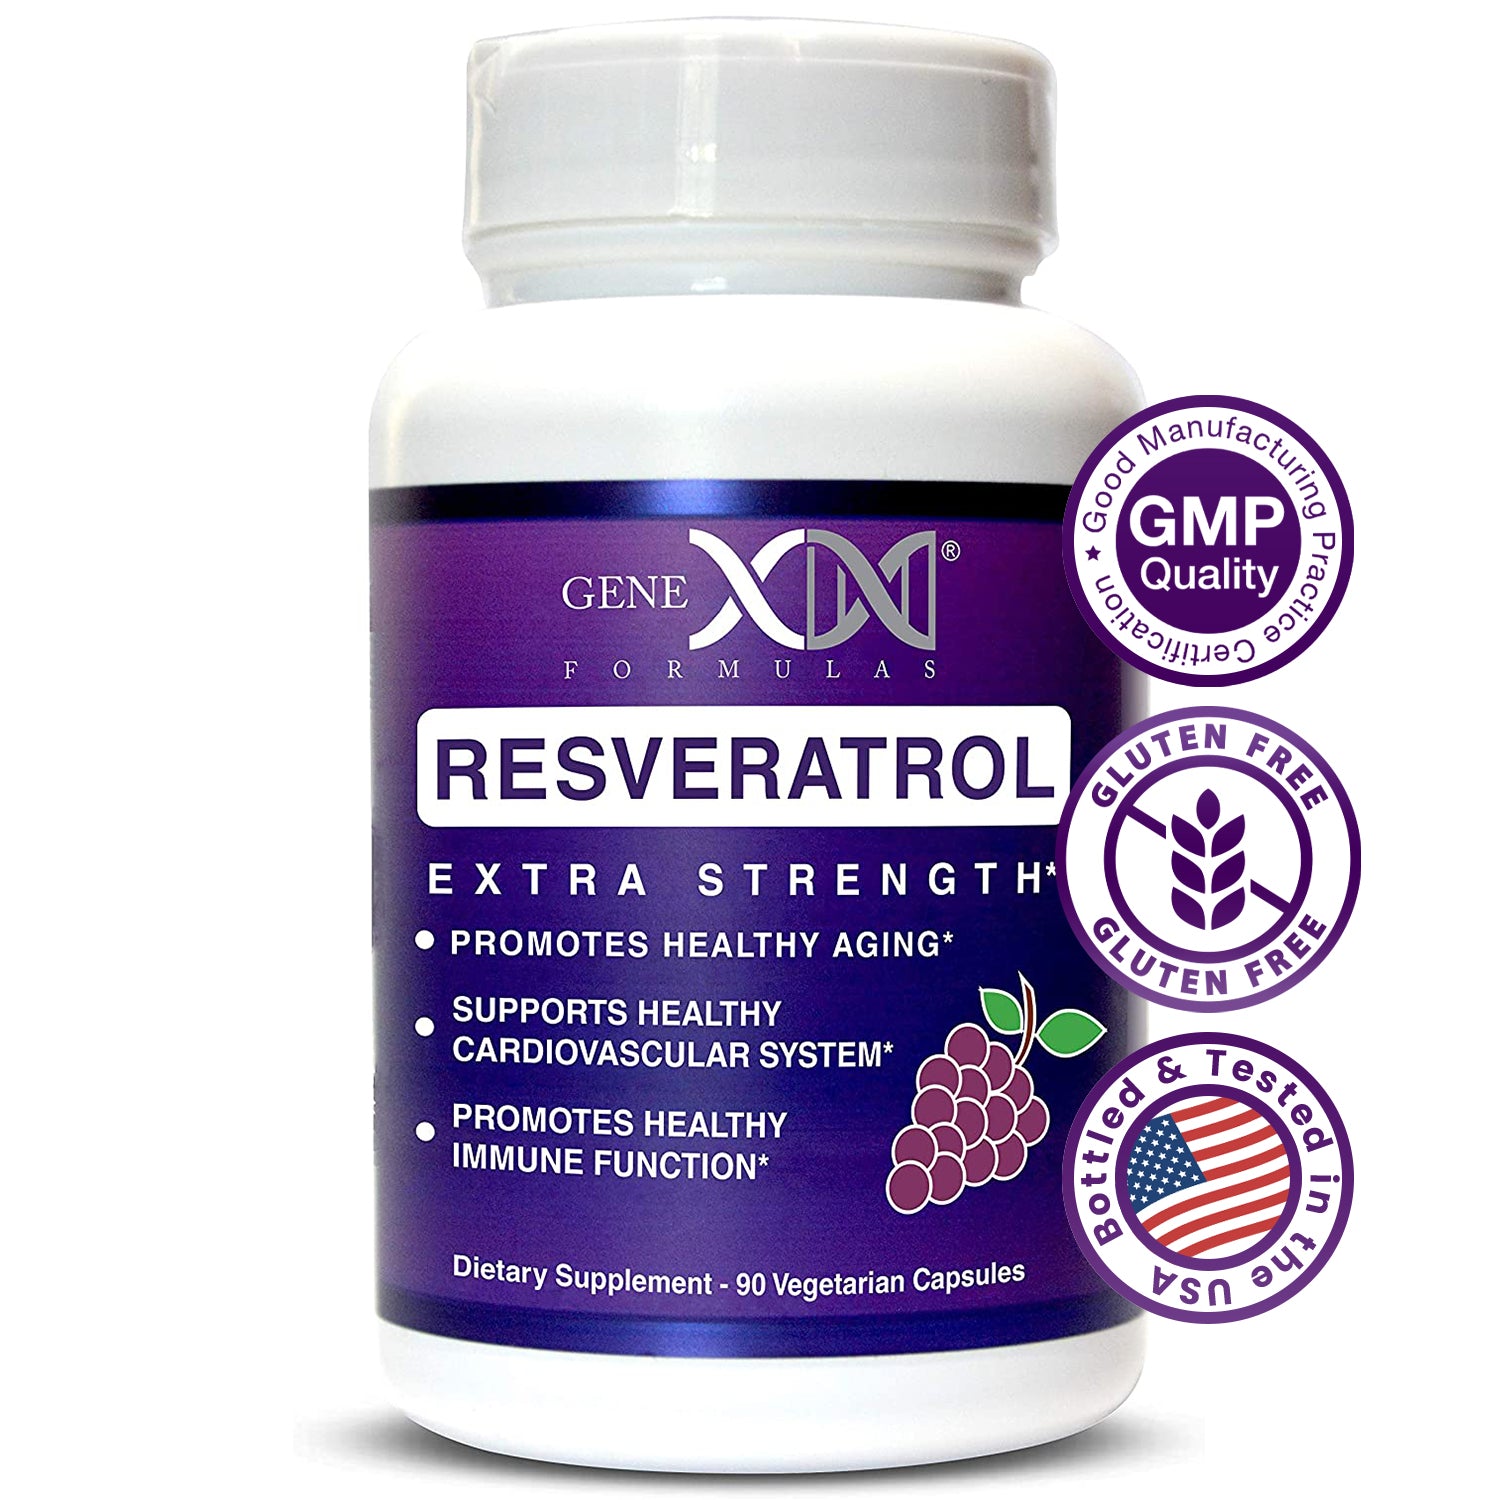 Genex resveratrol extra strength supplement bottle with icons that state "GMP certified facility, gluten free, and bottled and tested in the USA" 